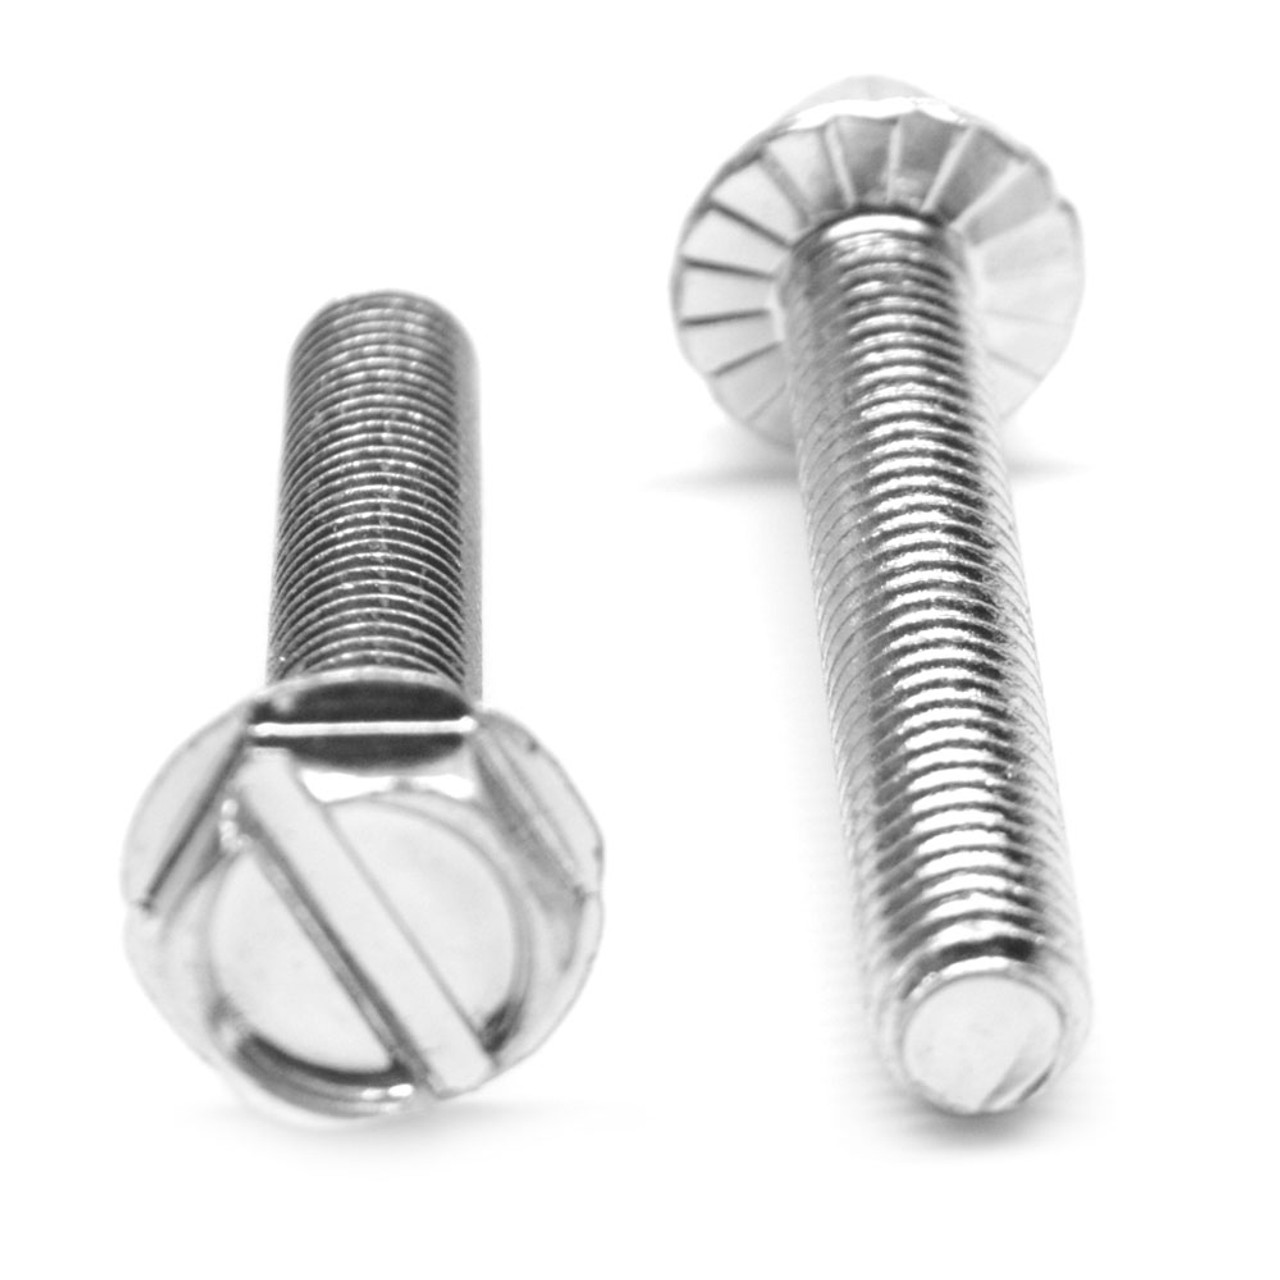 1/4-20 x 3/8 Coarse Thread Machine Screw Slotted Hex Washer Head with Serration Low Carbon Steel Zinc Plated